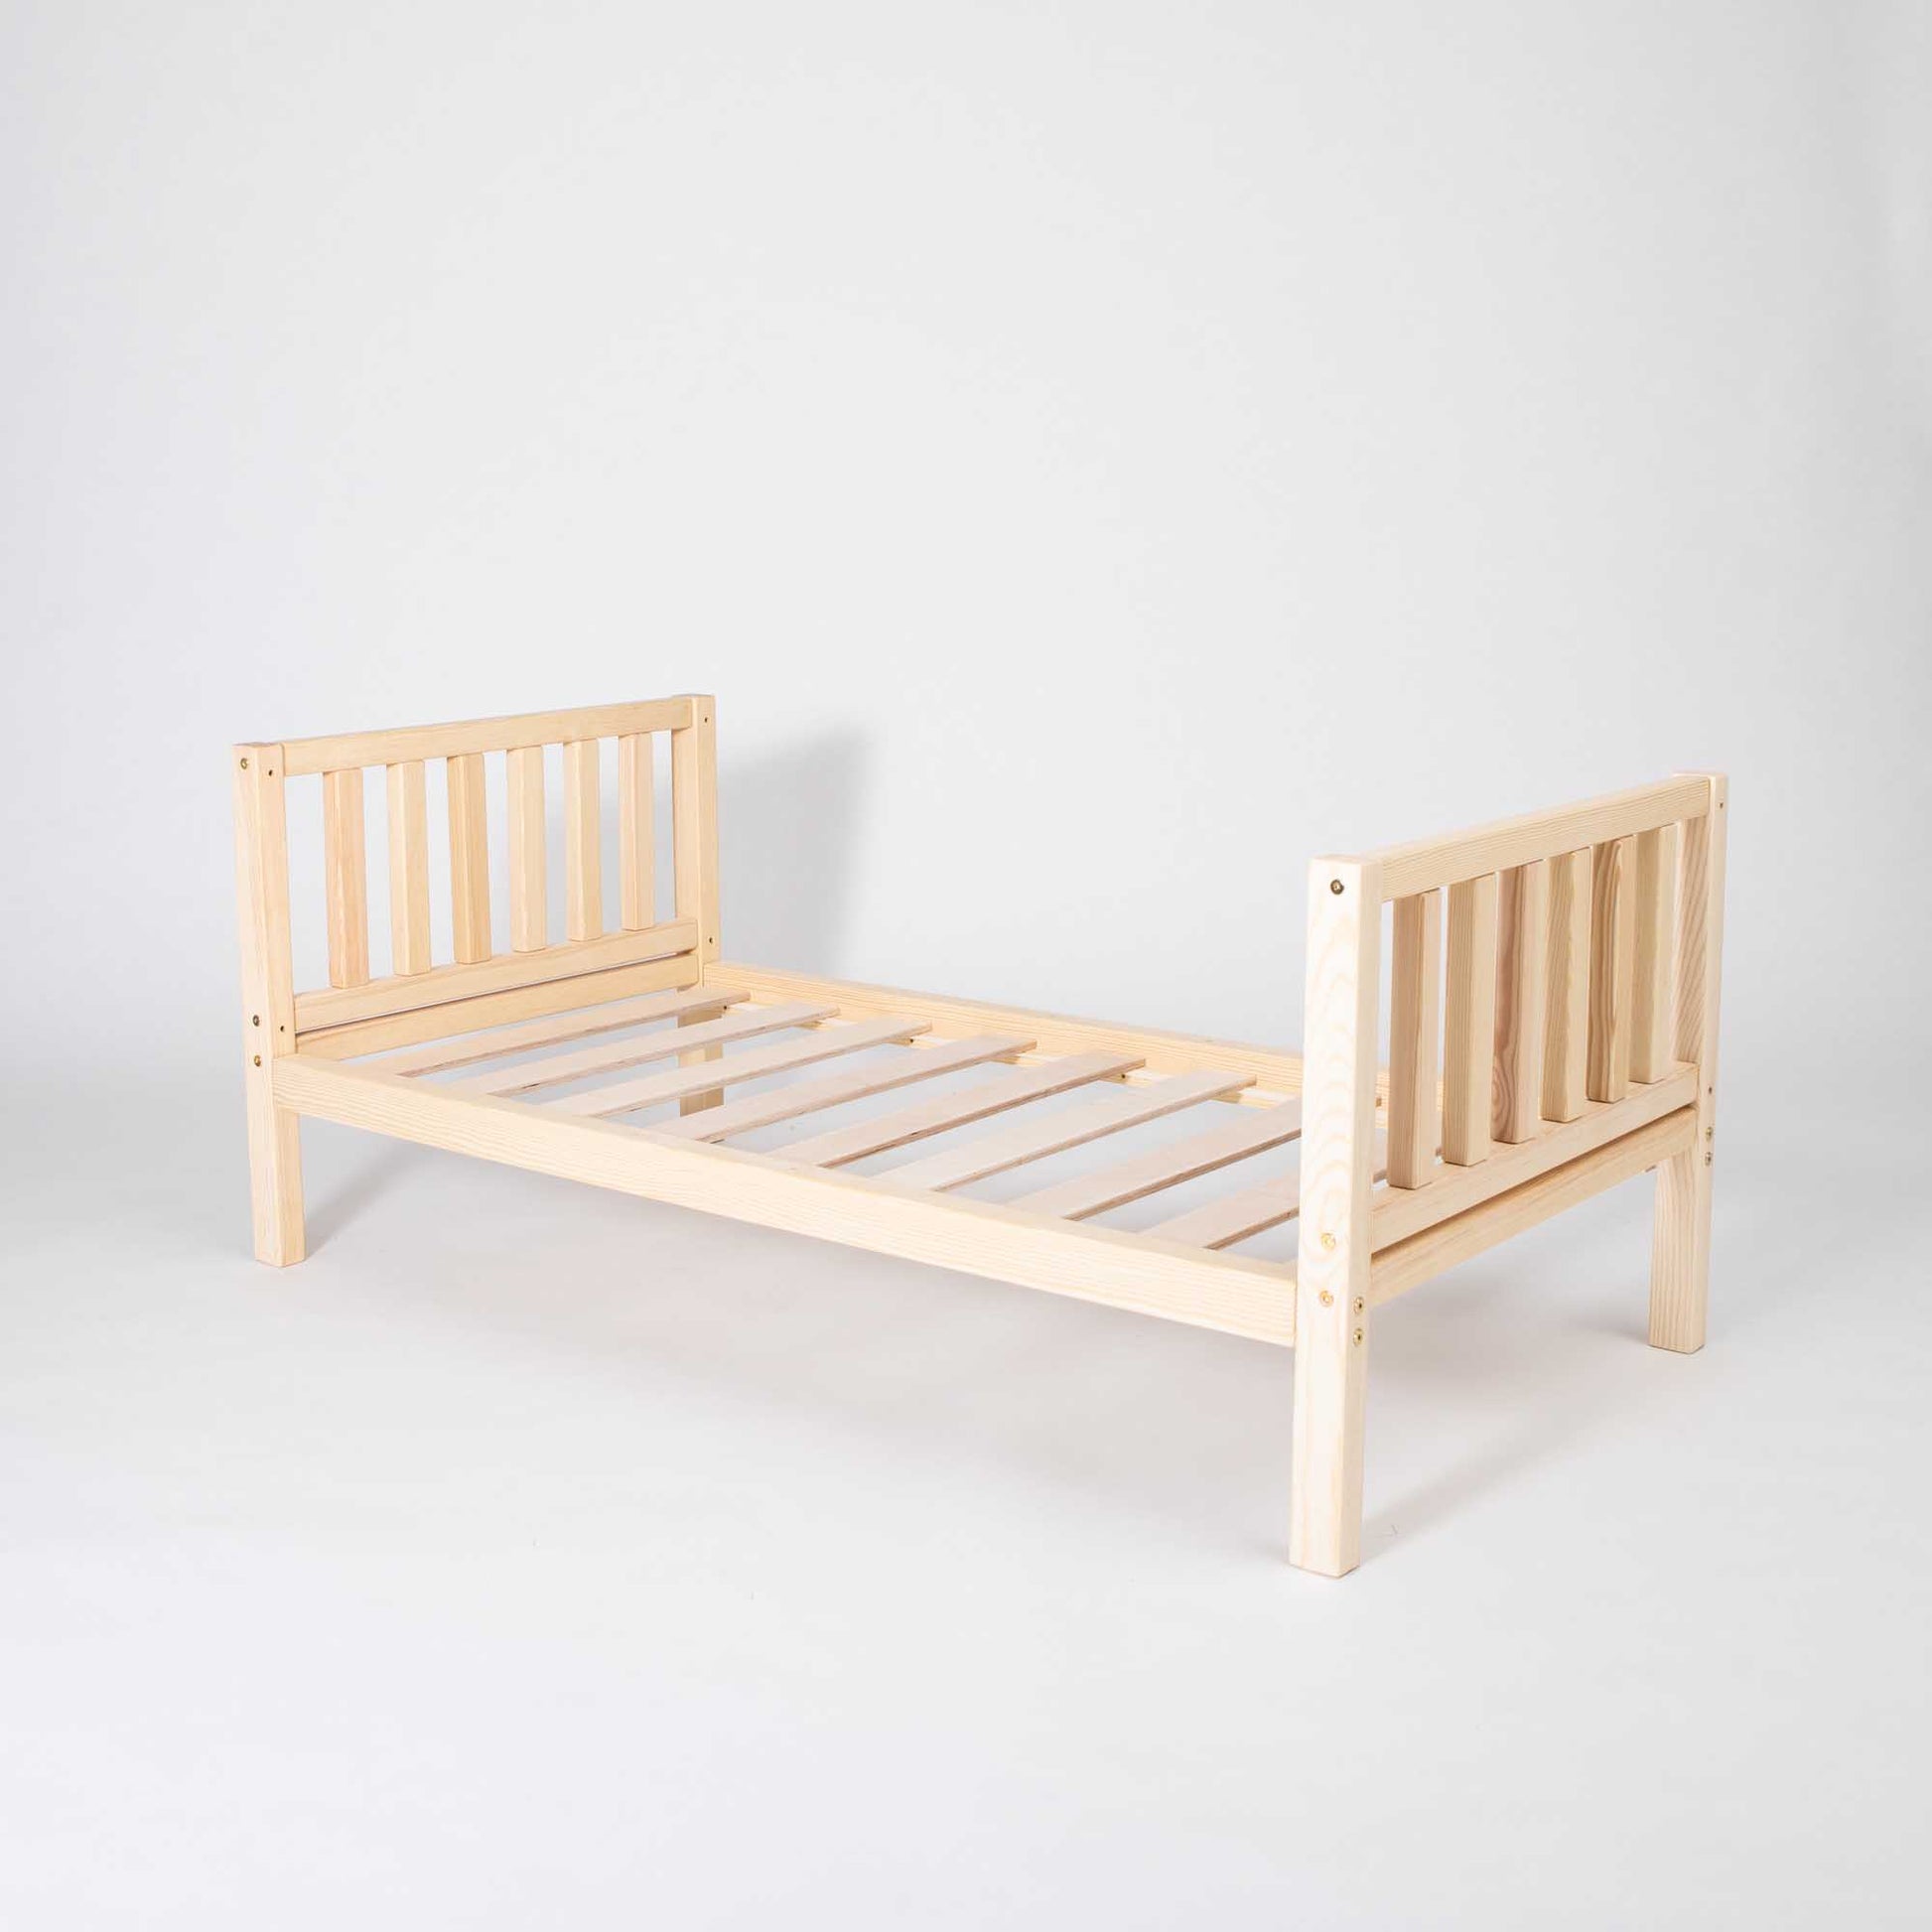 A 2-in-1 kid's bed on legs with a vertical rail headboard and footboard, made of solid pine or birch wood, with slats.